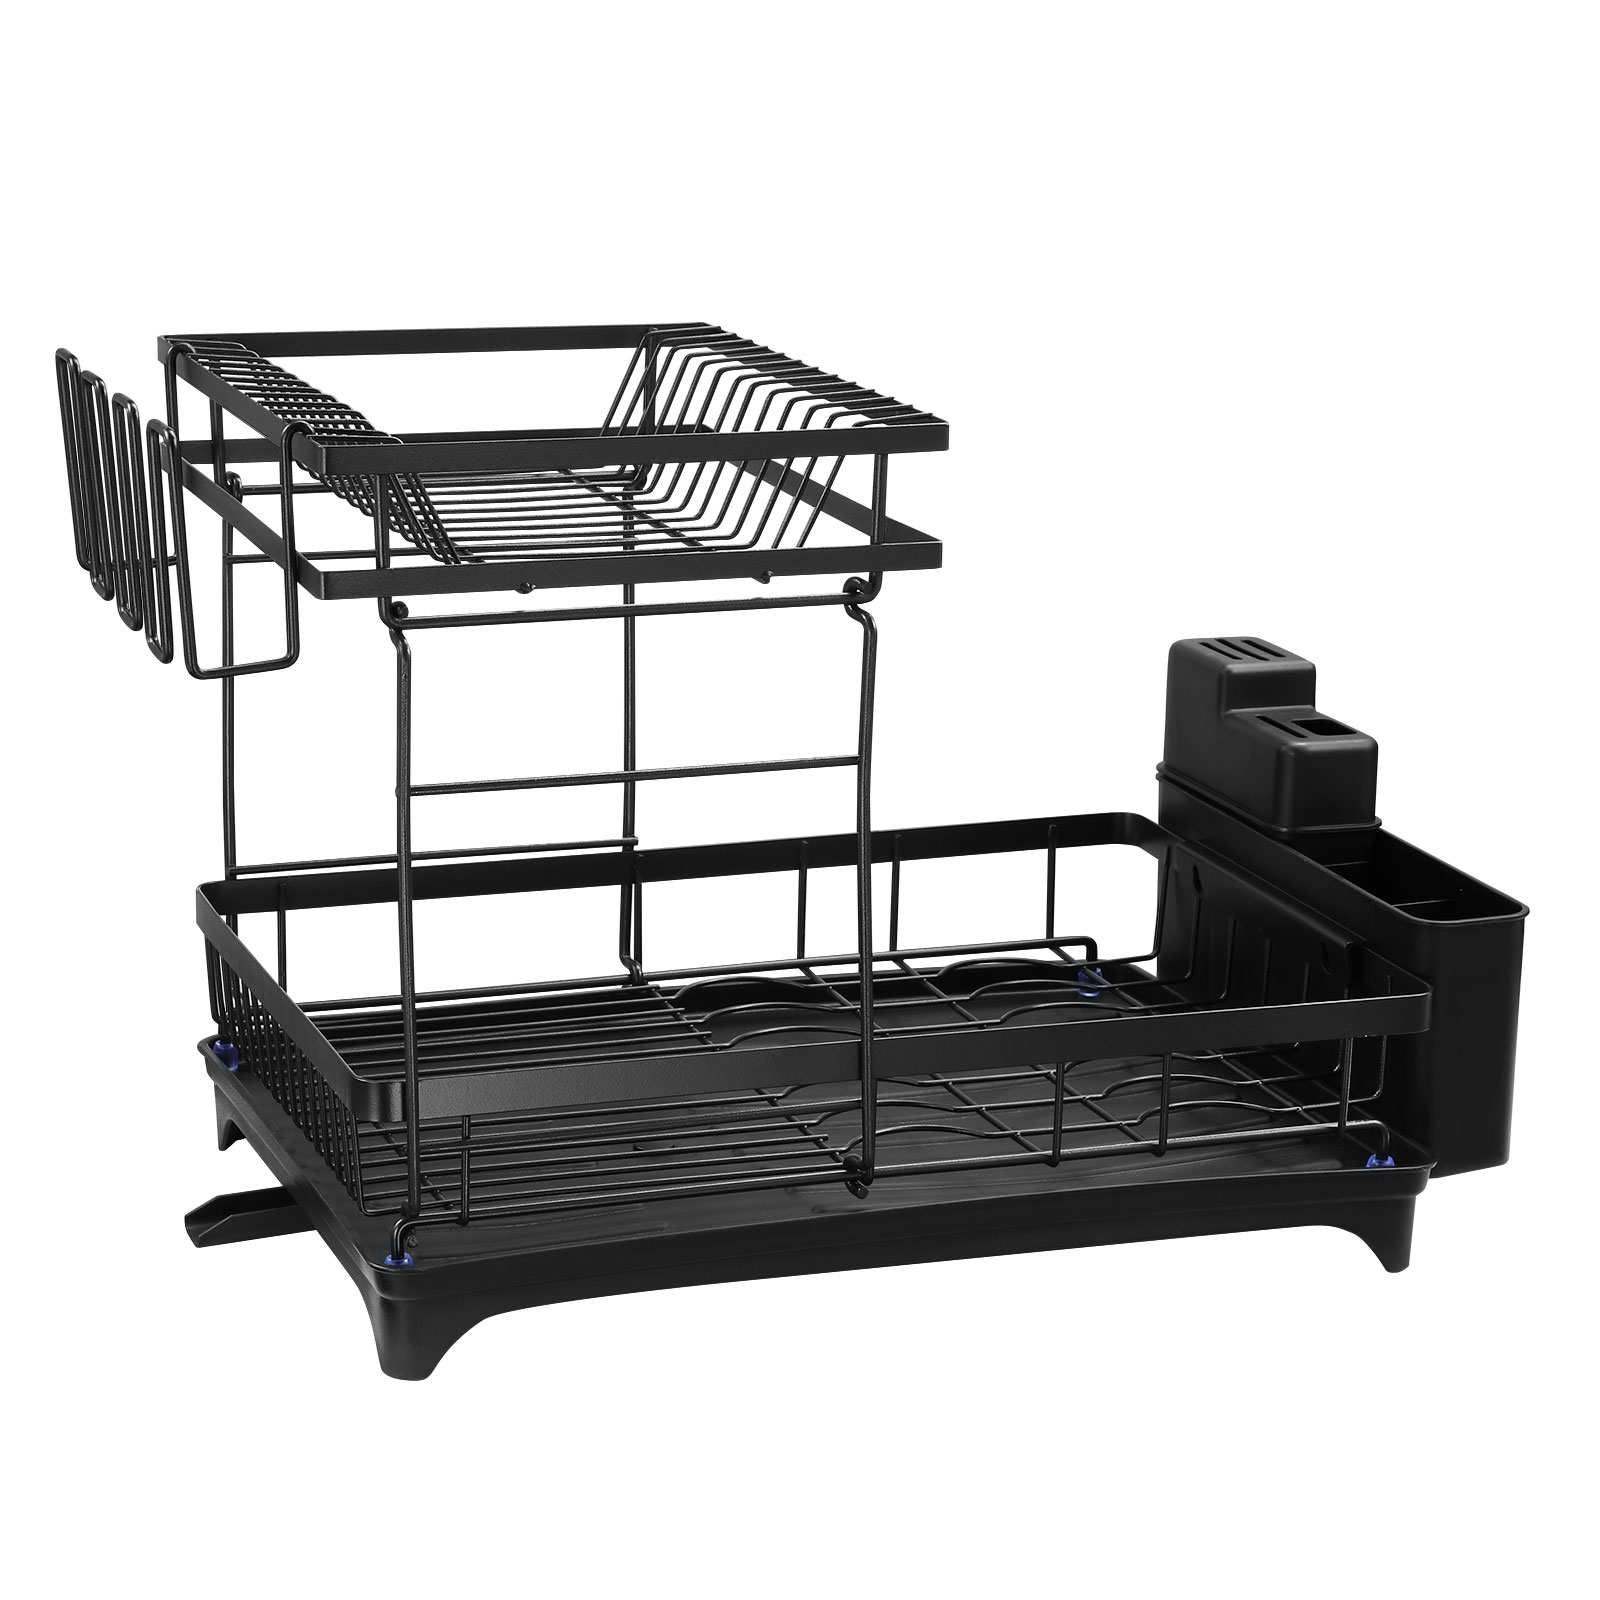 Two-Tier Dish Drying Rack with Drainage